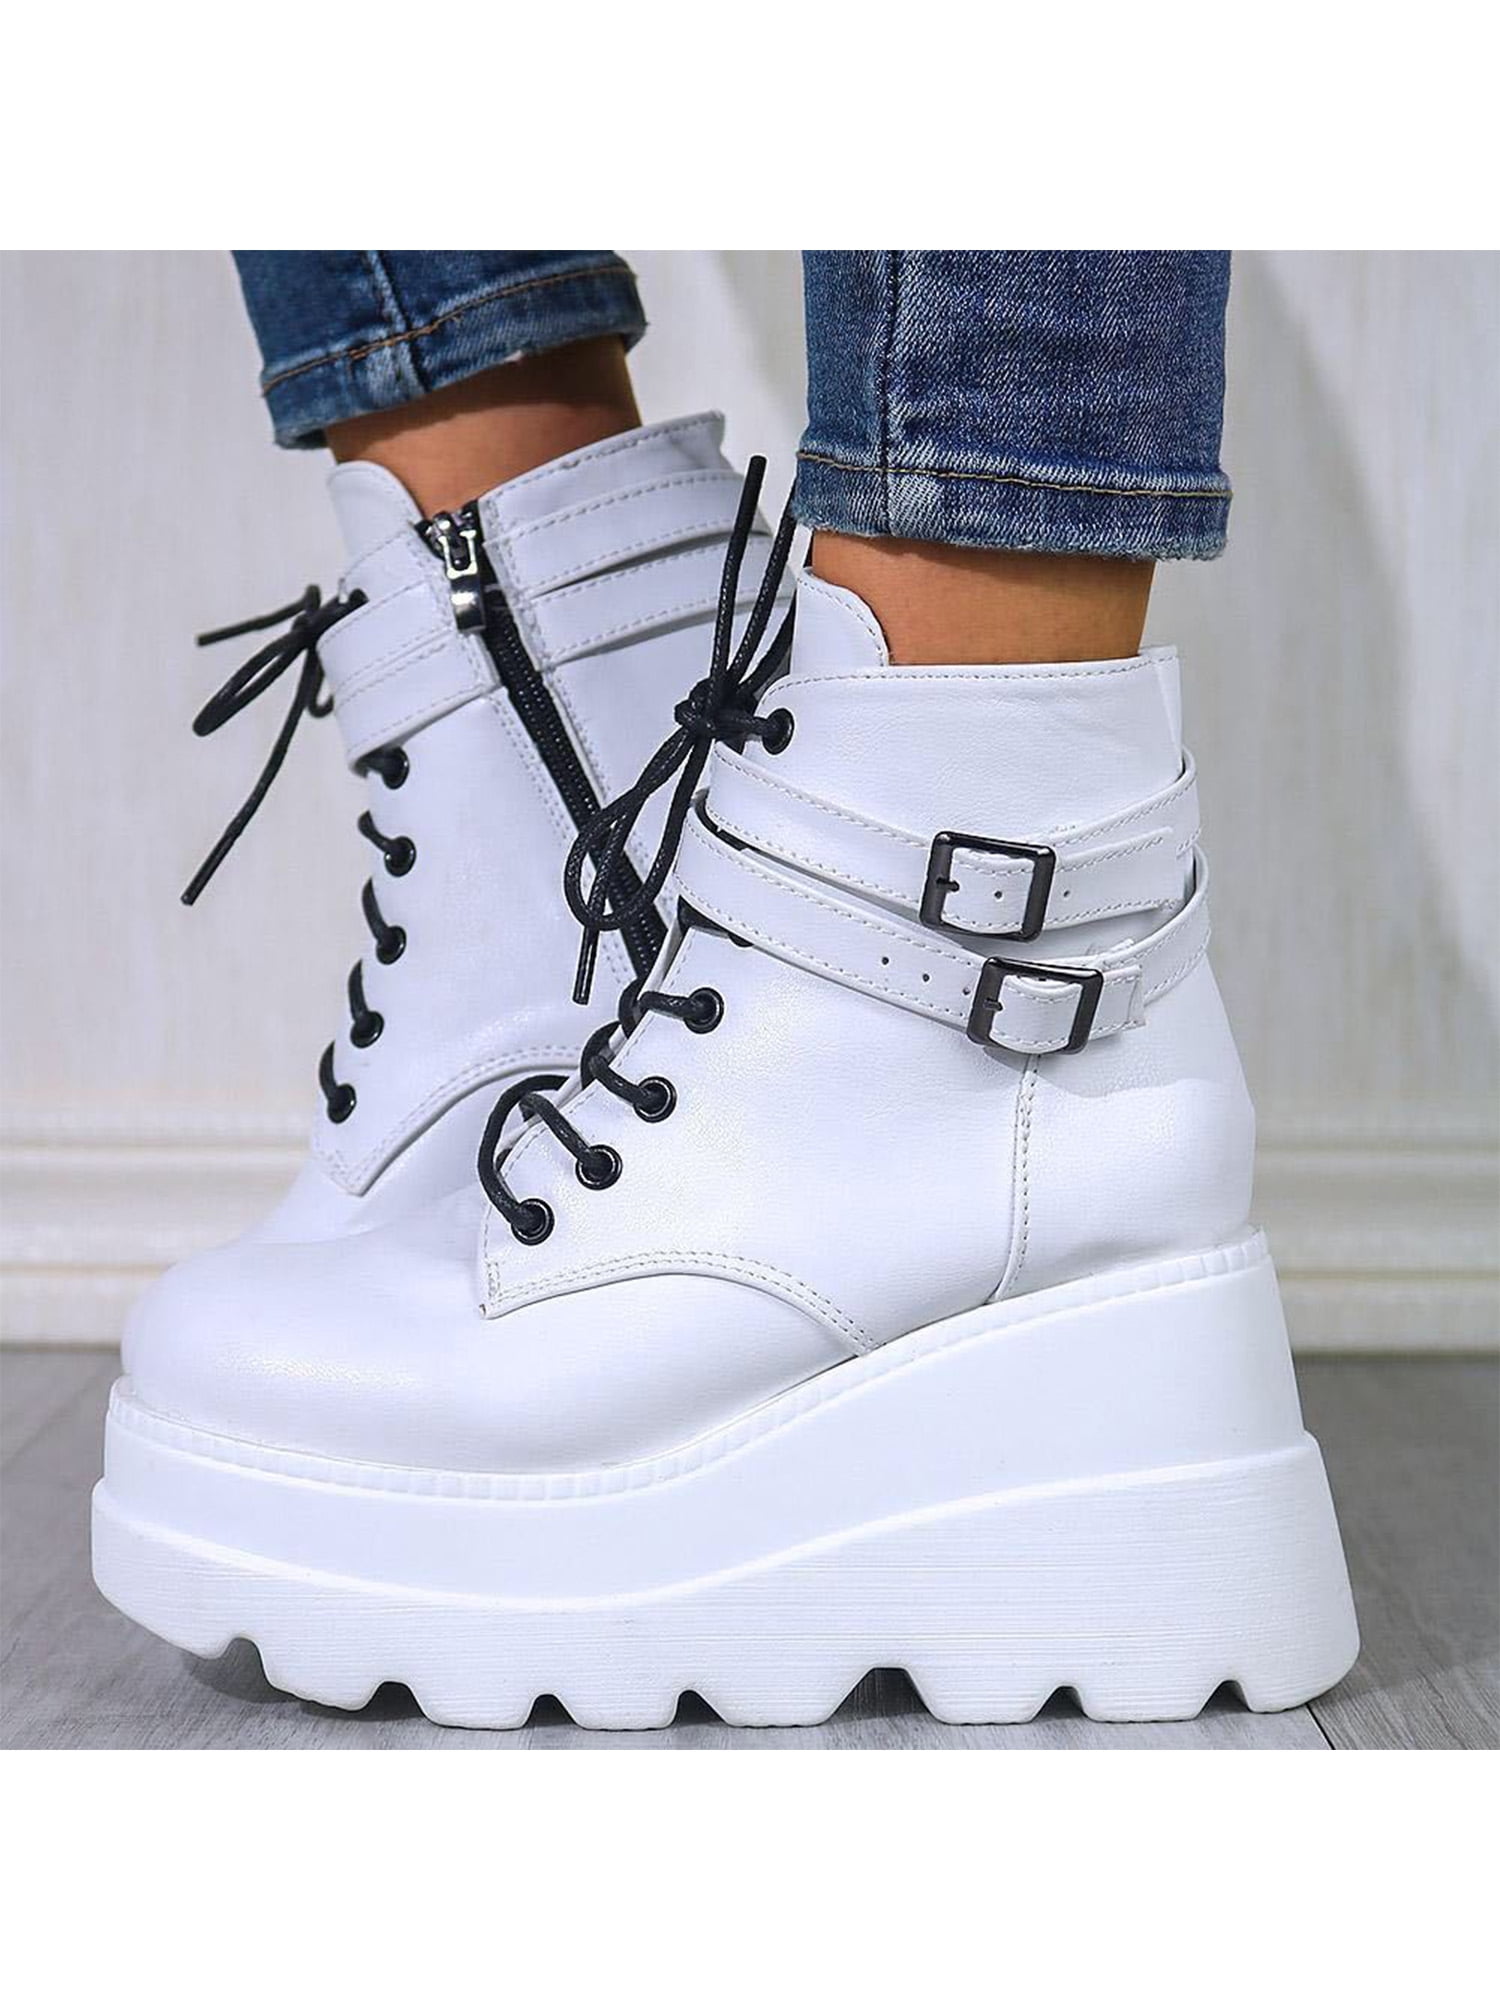 01 Womens Military Fashion Camo High Chunky Heels Punk Ankle Boots Shoes Lace Up